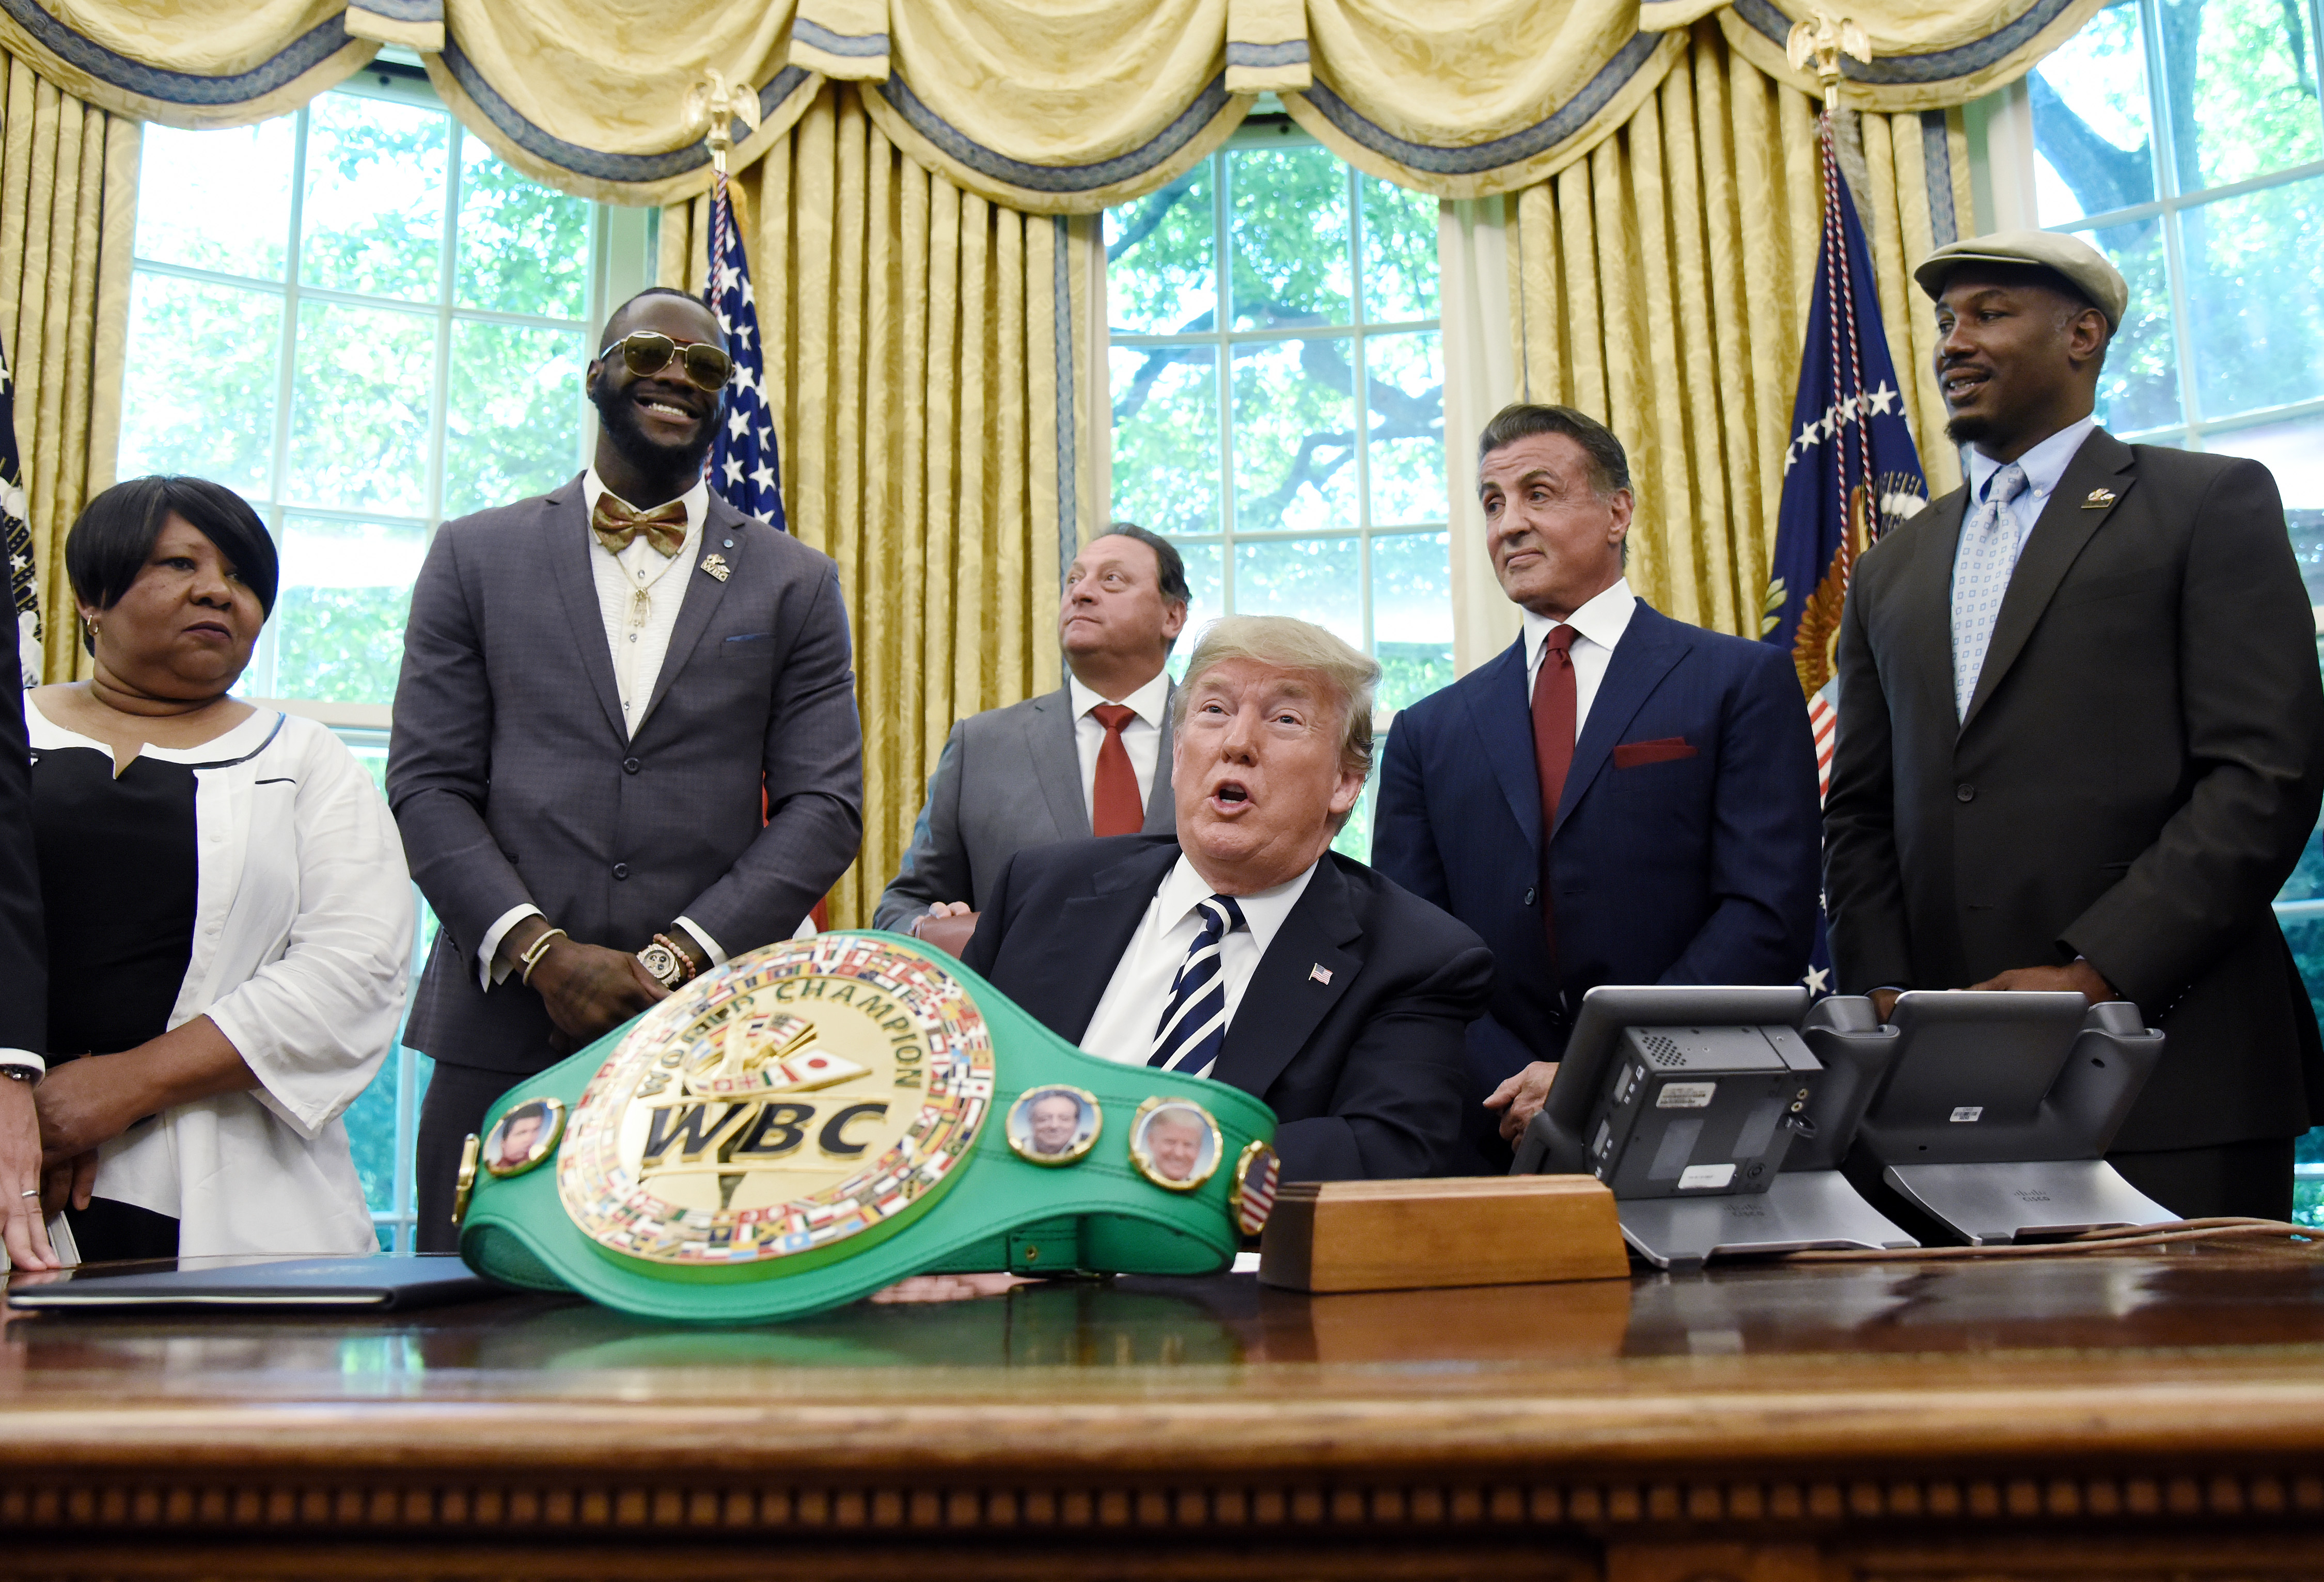 U.S. President Donald Trump speaks after signing an executive order granting a posthumous pardon for Jack Johnson, the first black heavyweight boxing champion, as boxing champion Lenox Lewis, from left, and actor Sylvester Stallone attend in the Oval Office of the White House in Washington, D.C., U.S., on Thursday, May 24, 2018. (Bloomberg&mdash;Bloomberg via Getty Images)